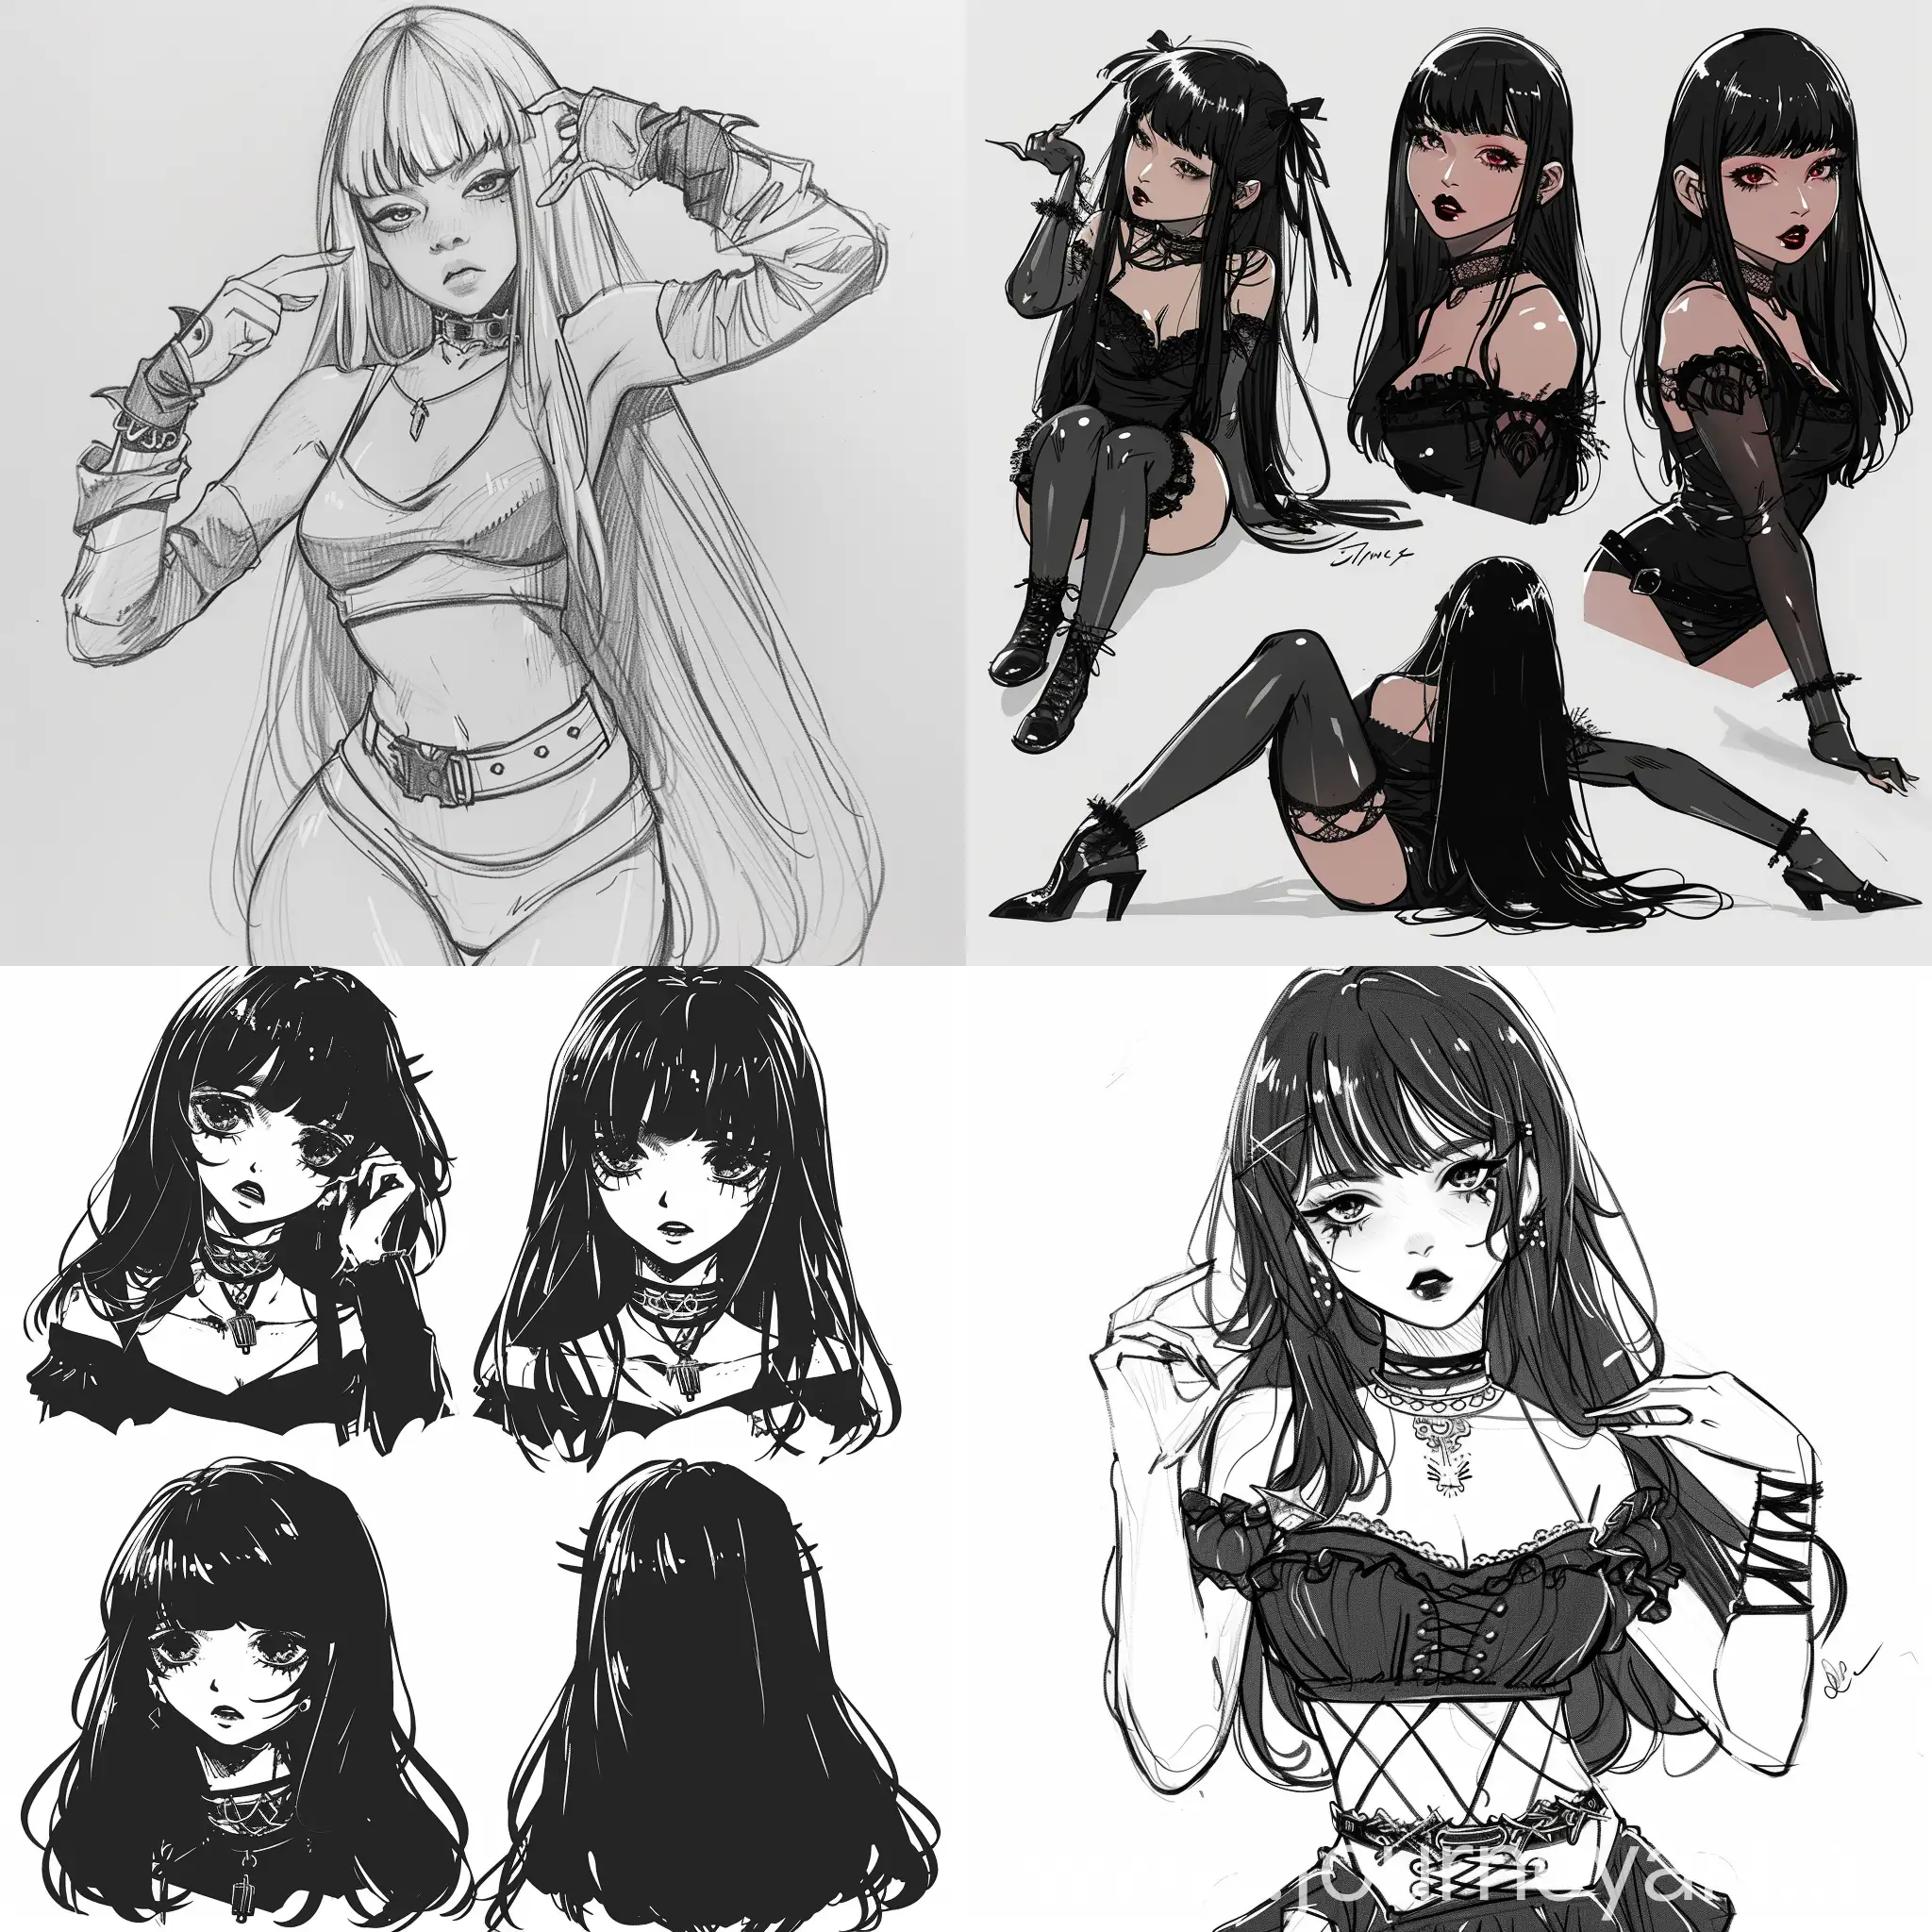 DRAW A GOTH ANIME GIRL DOING POSES 